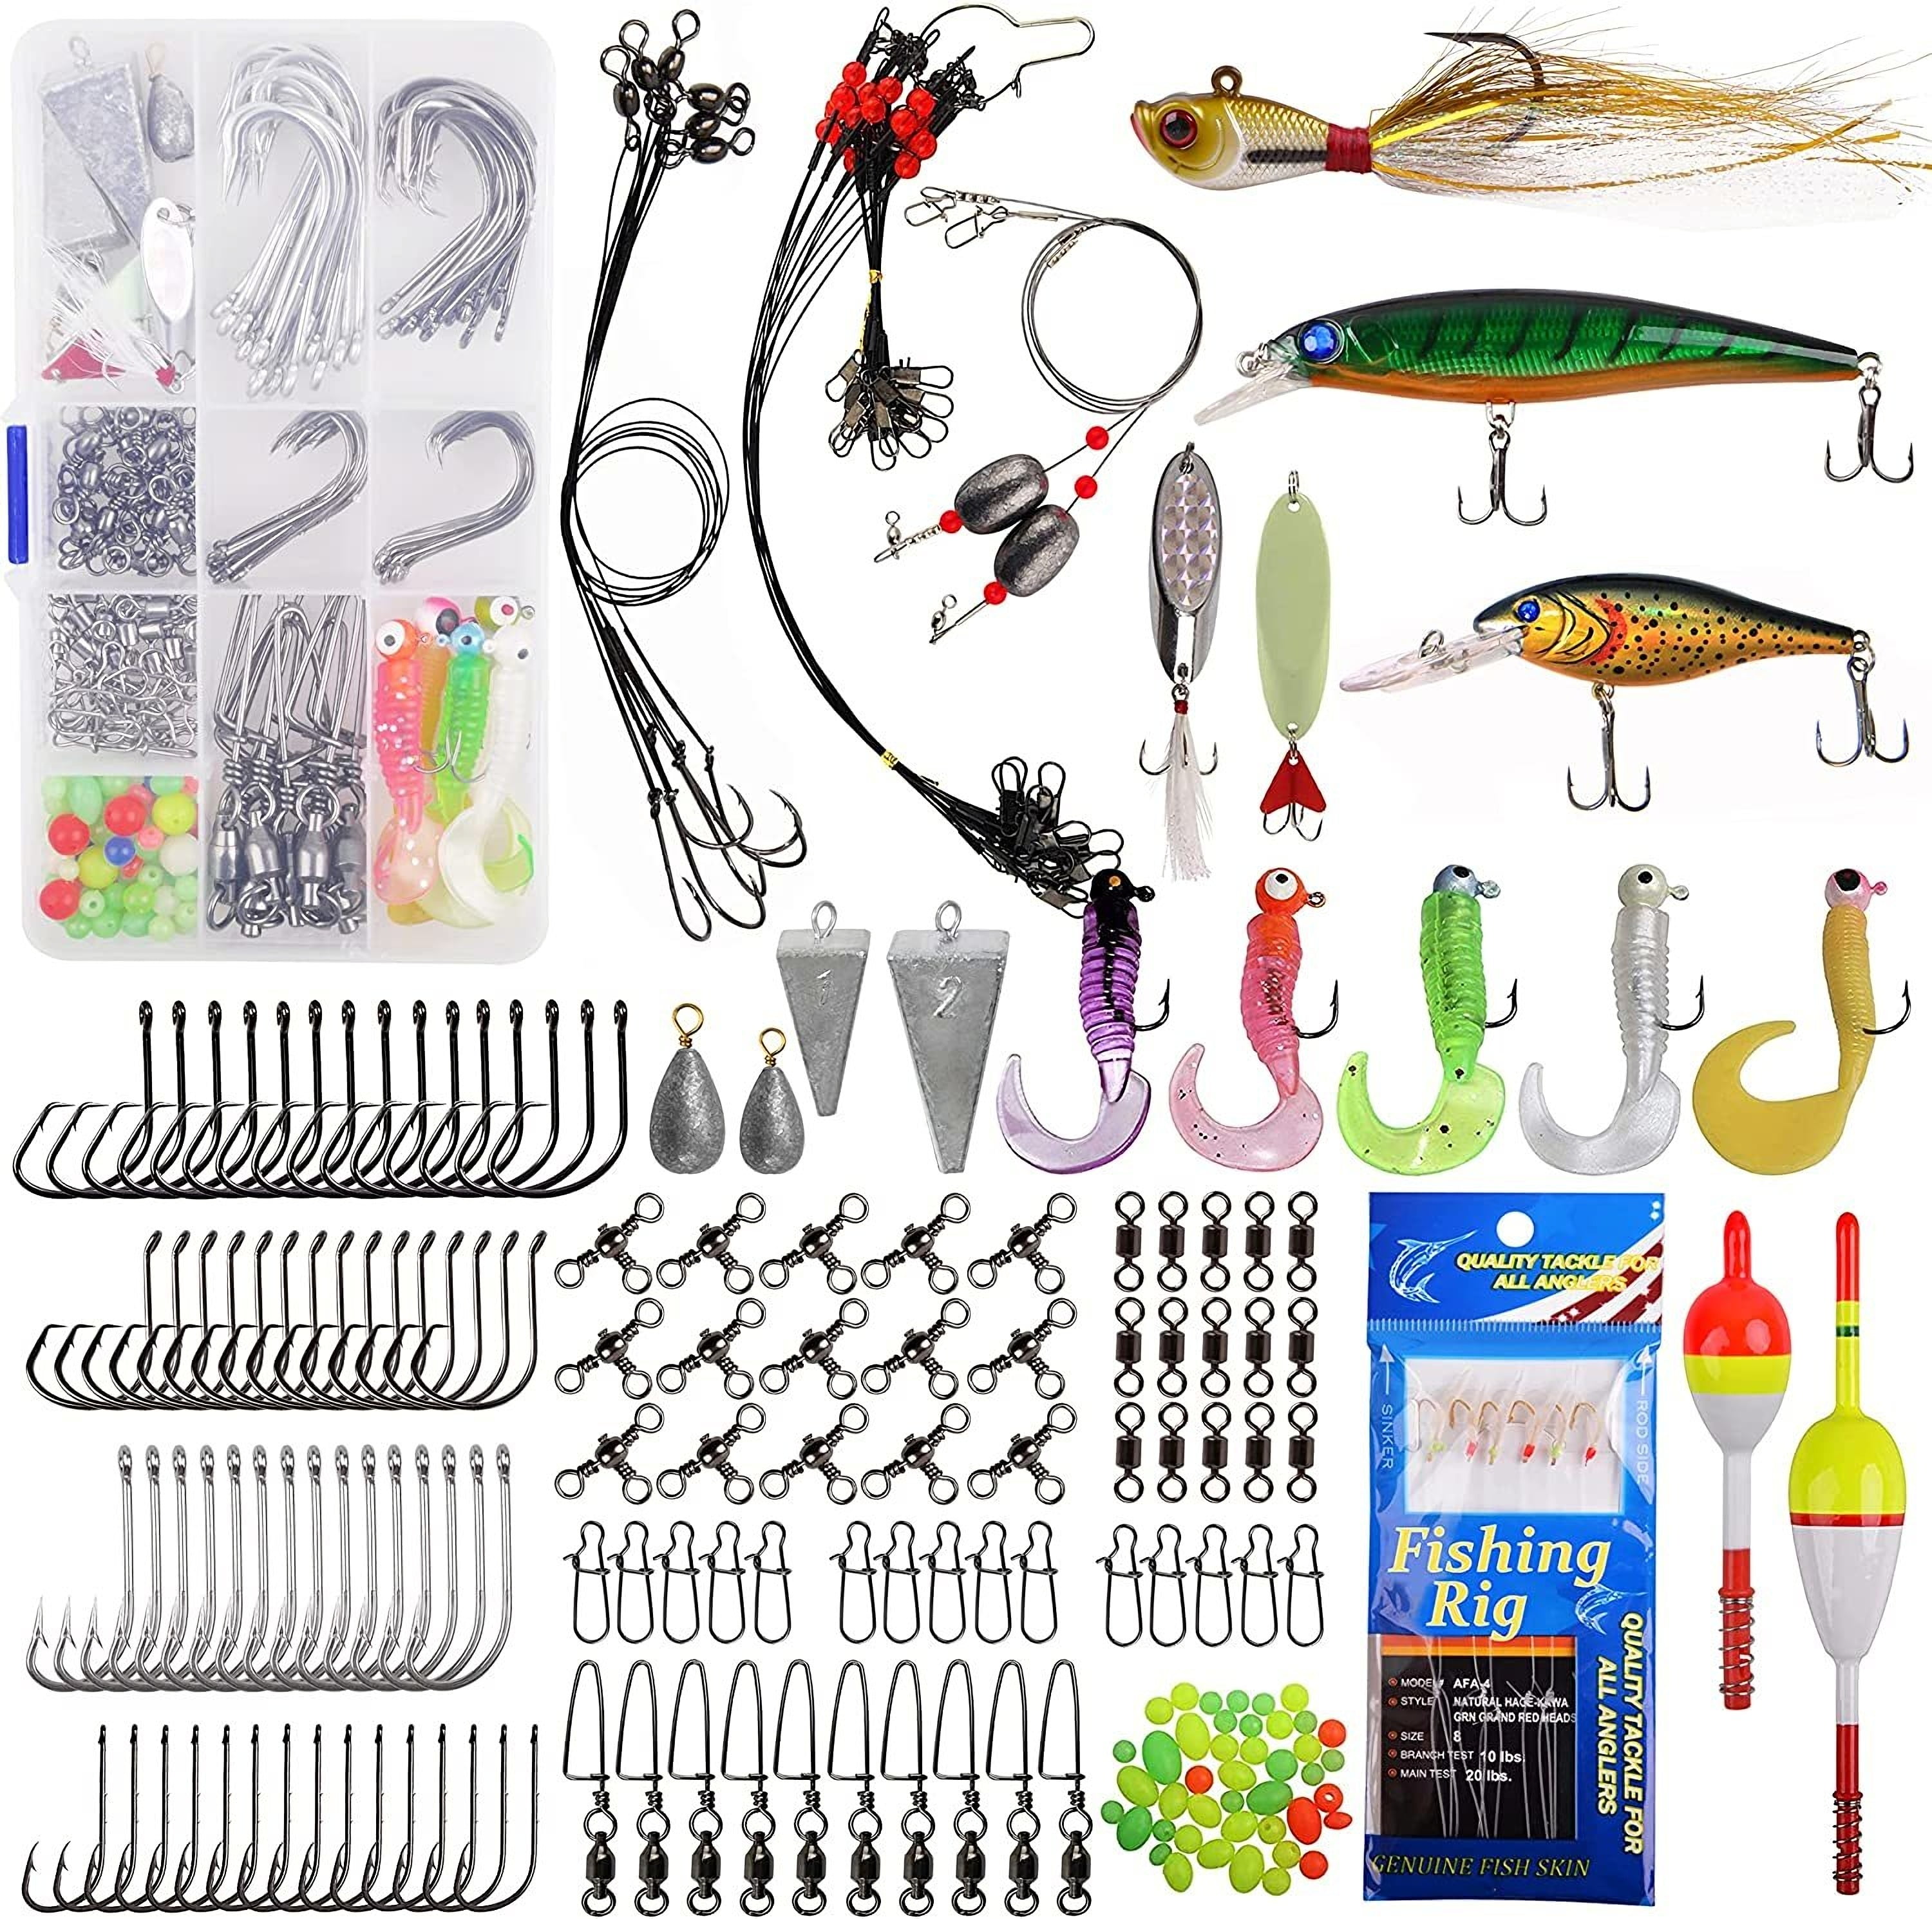 Fishing Lures Mixed Lots including Hard Lure Diving Floating Lures